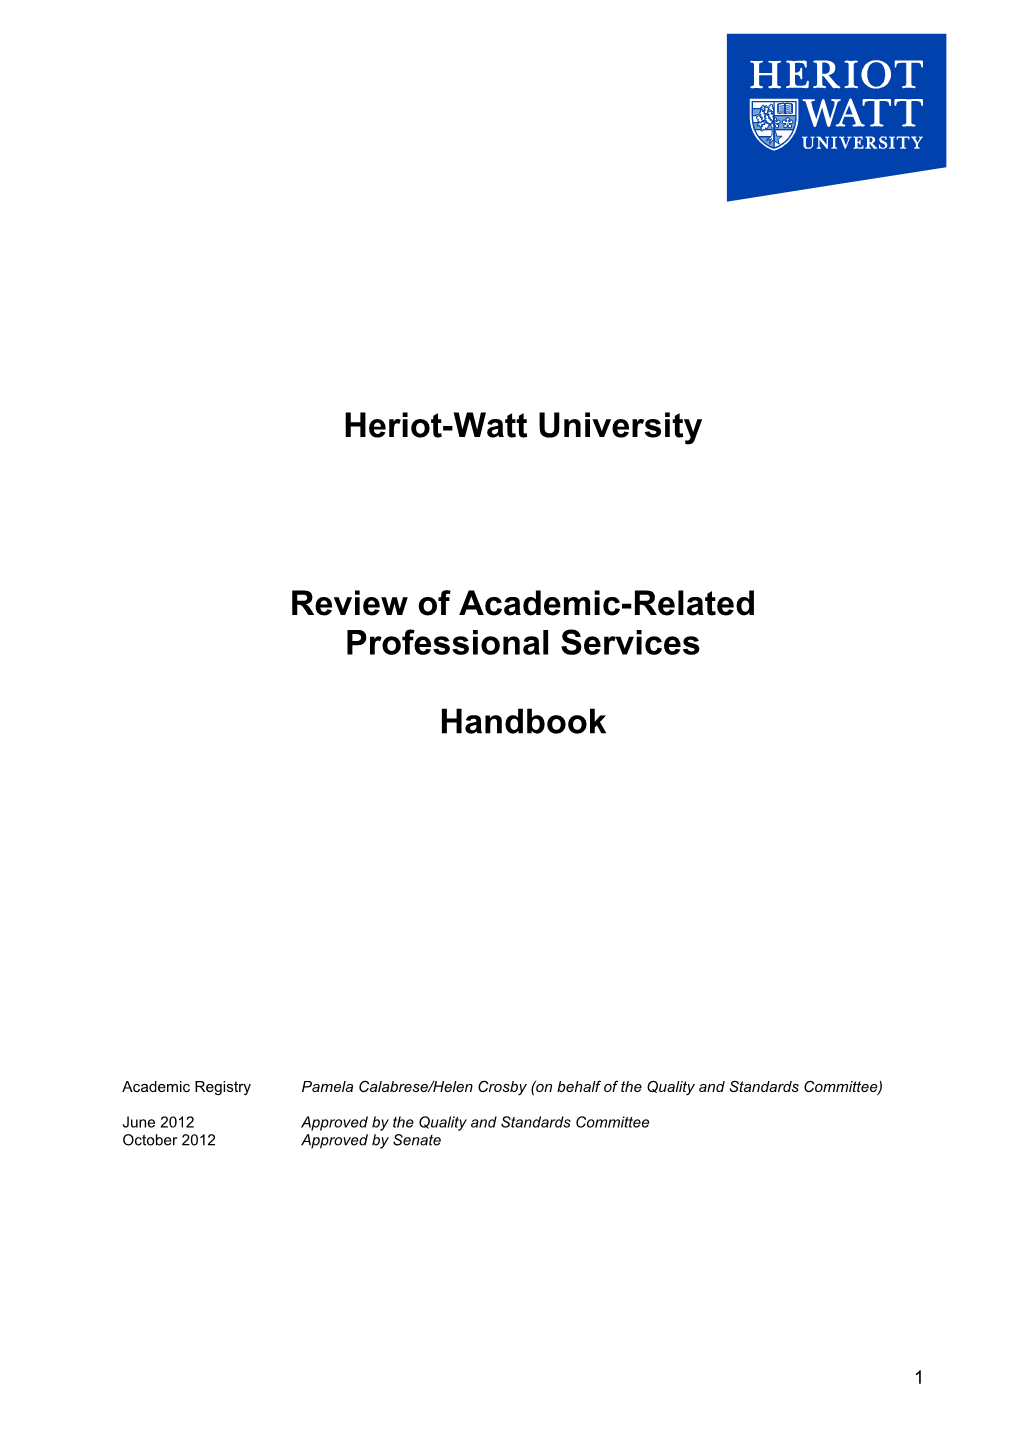 Overview of HWU Processes